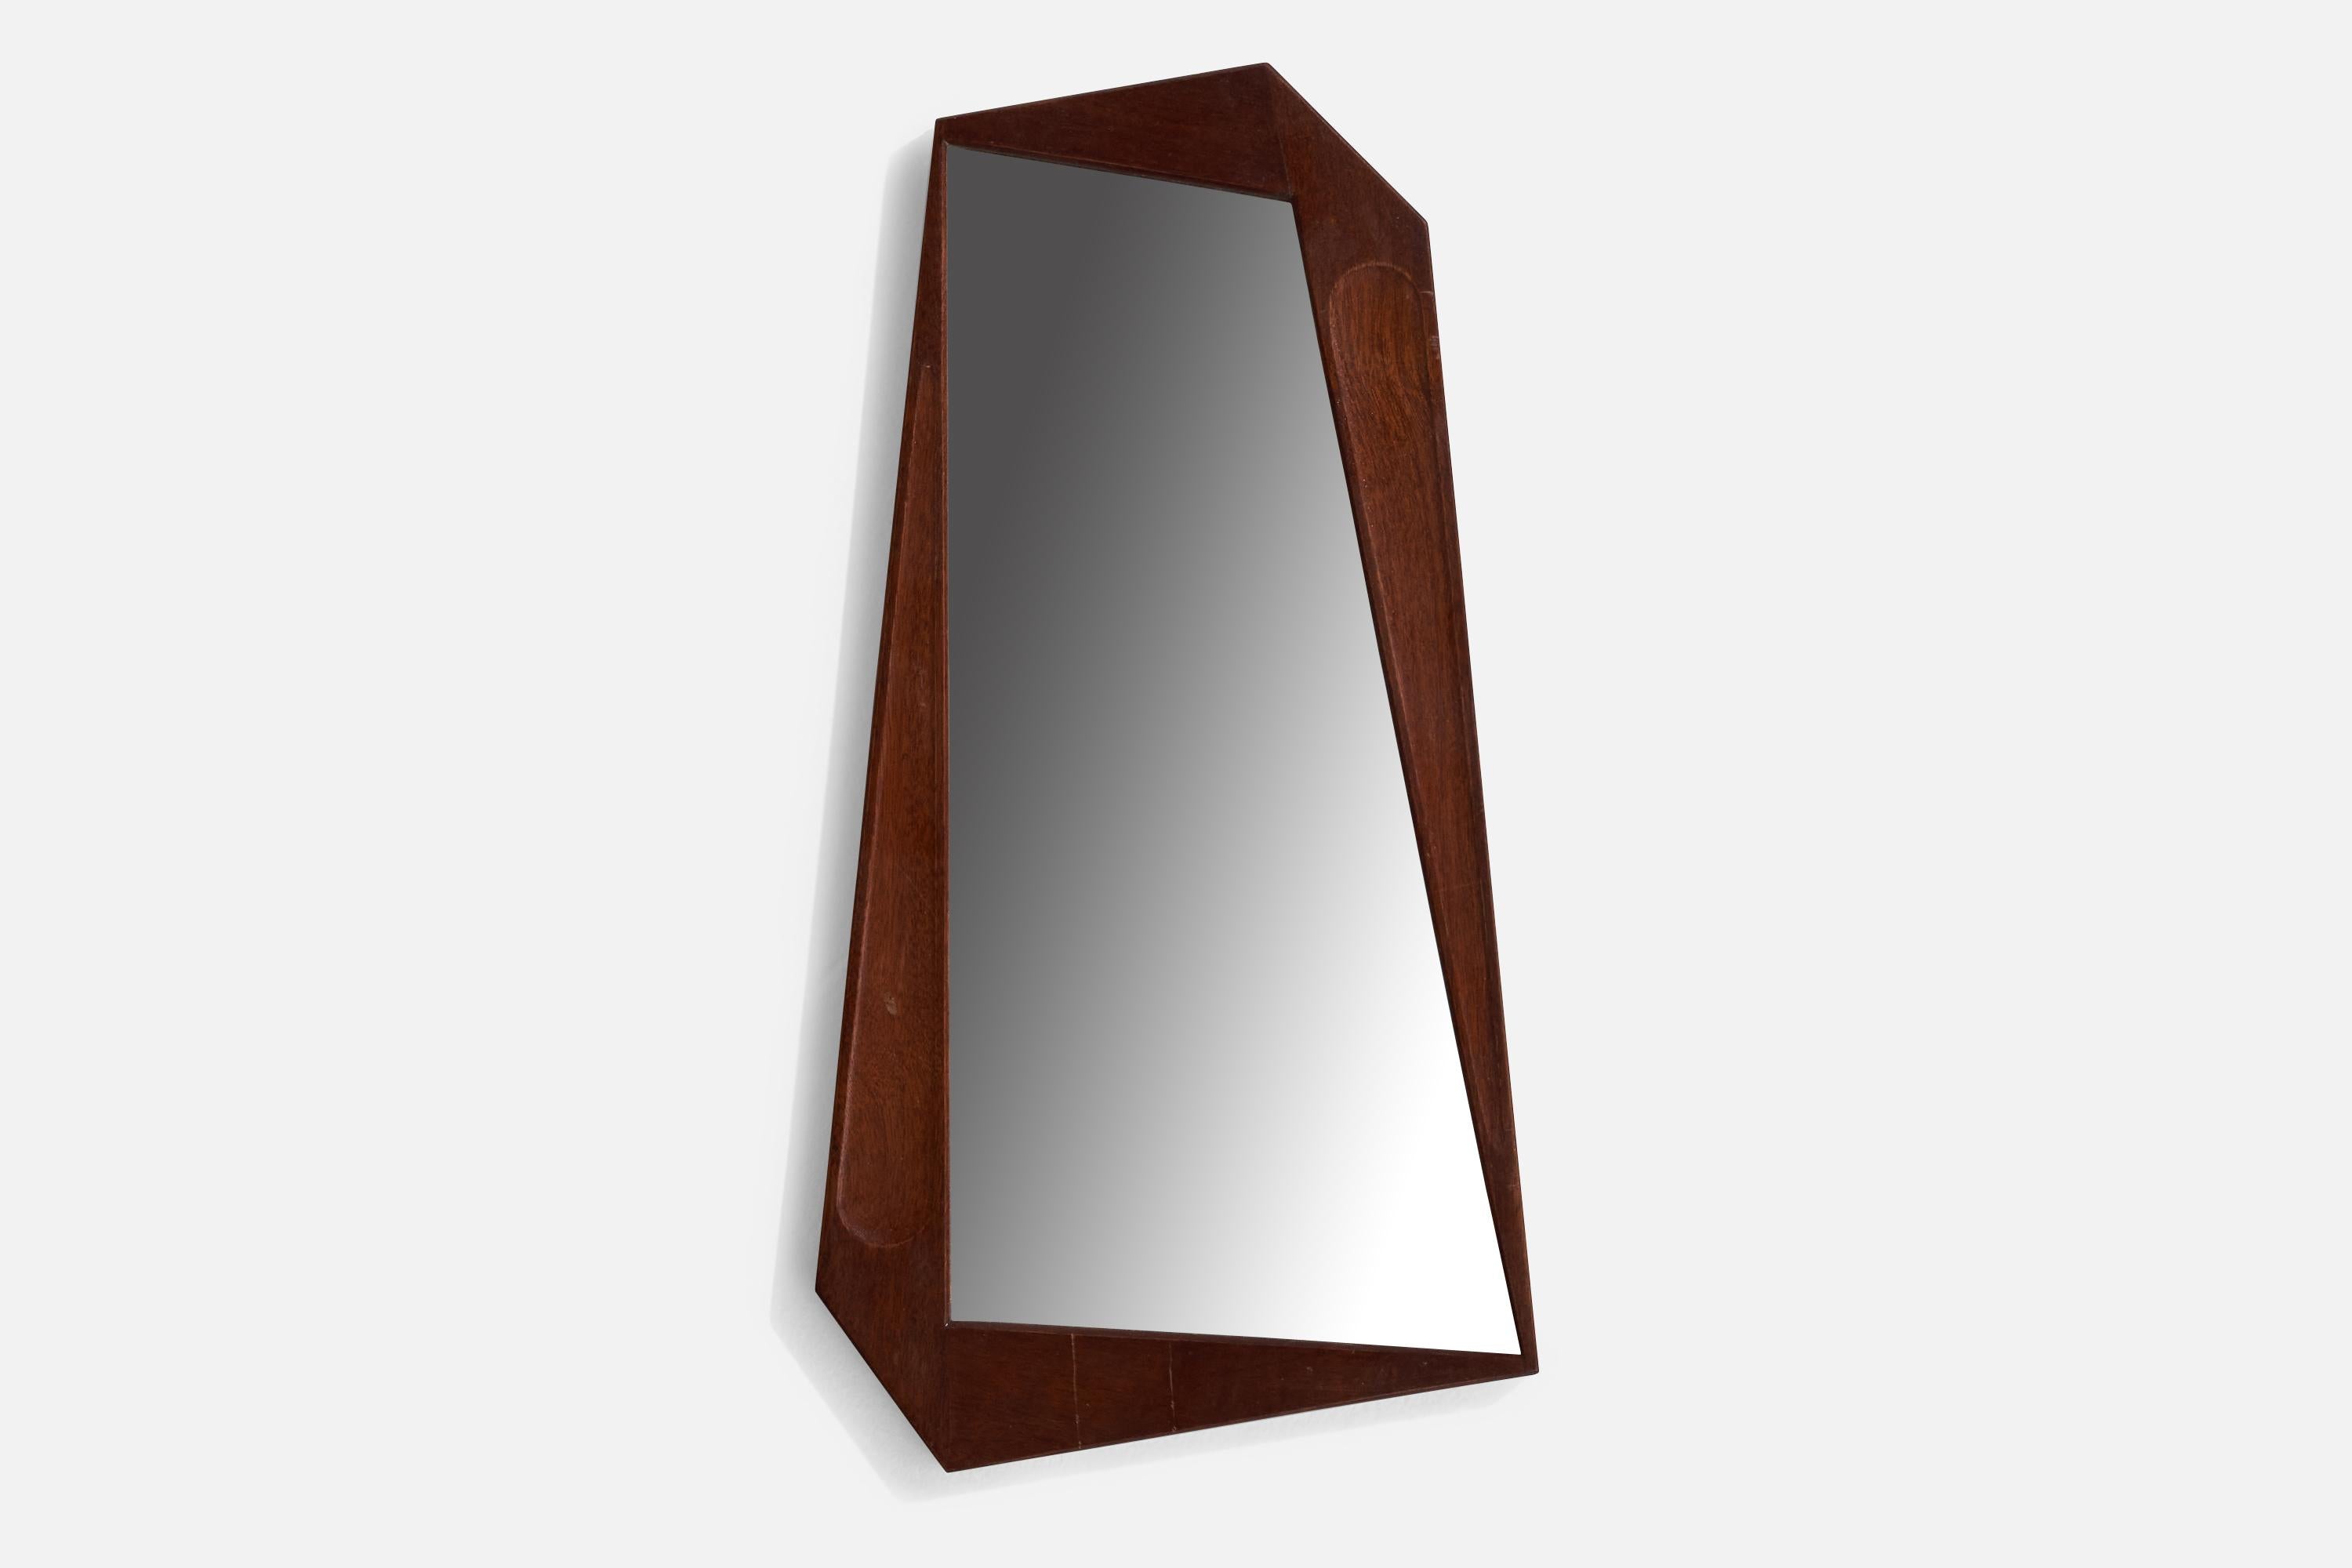 A small asymmetric teak wall mirror designed and produced in Sweden, c. 1950s.

